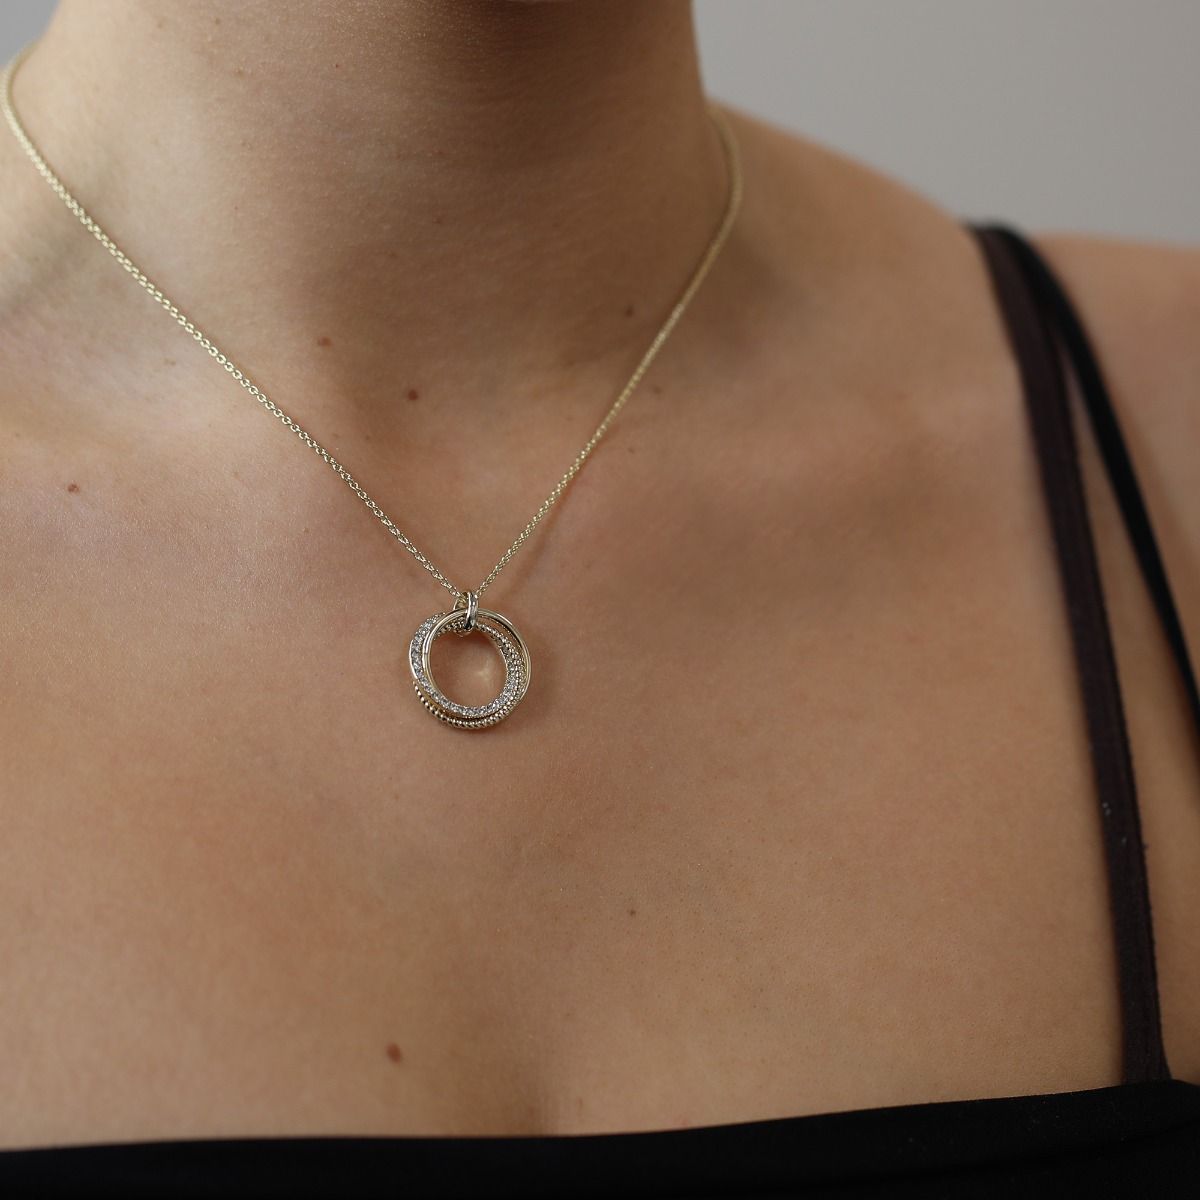 The polished trio hoop pendant presents a contemporary flair with its plain, textured and crystal hoops. Not only does this pendant experiment with texture, but it adds visual appeal. 